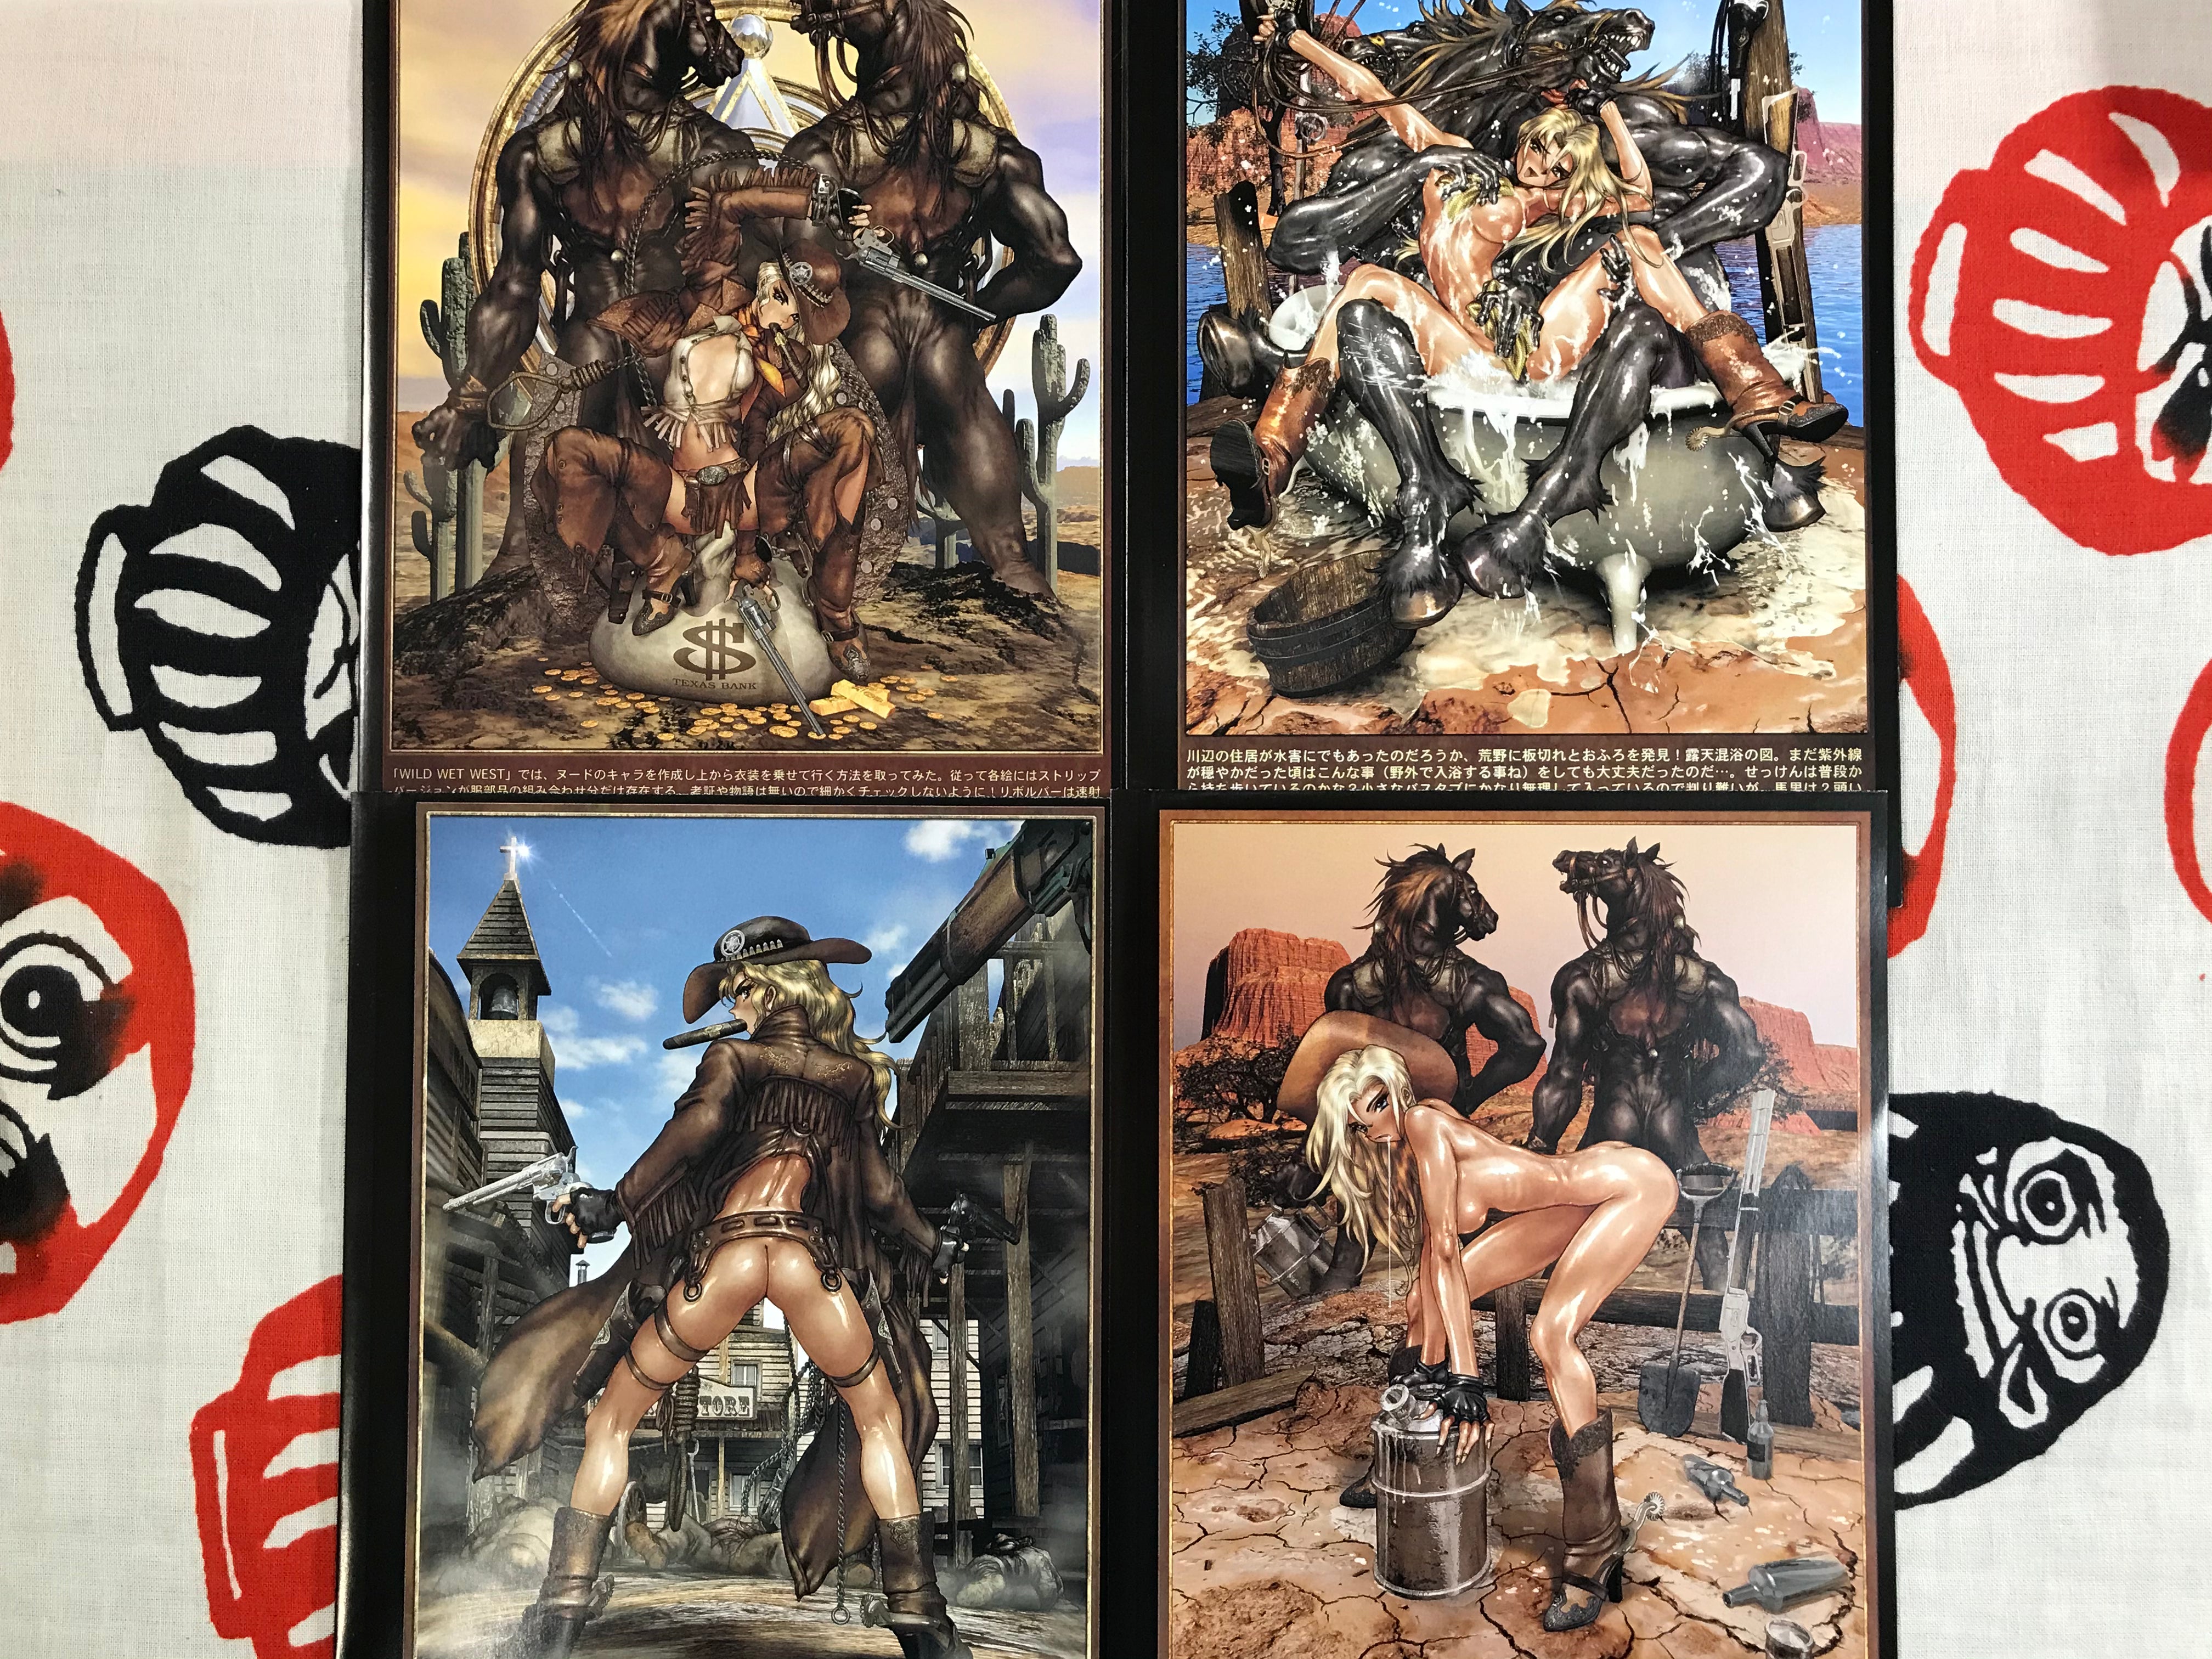 Galgrease 1st Series Wild Wet West Poster Book 001 w/ sealed trading cards by Shirow Masamune (2003)